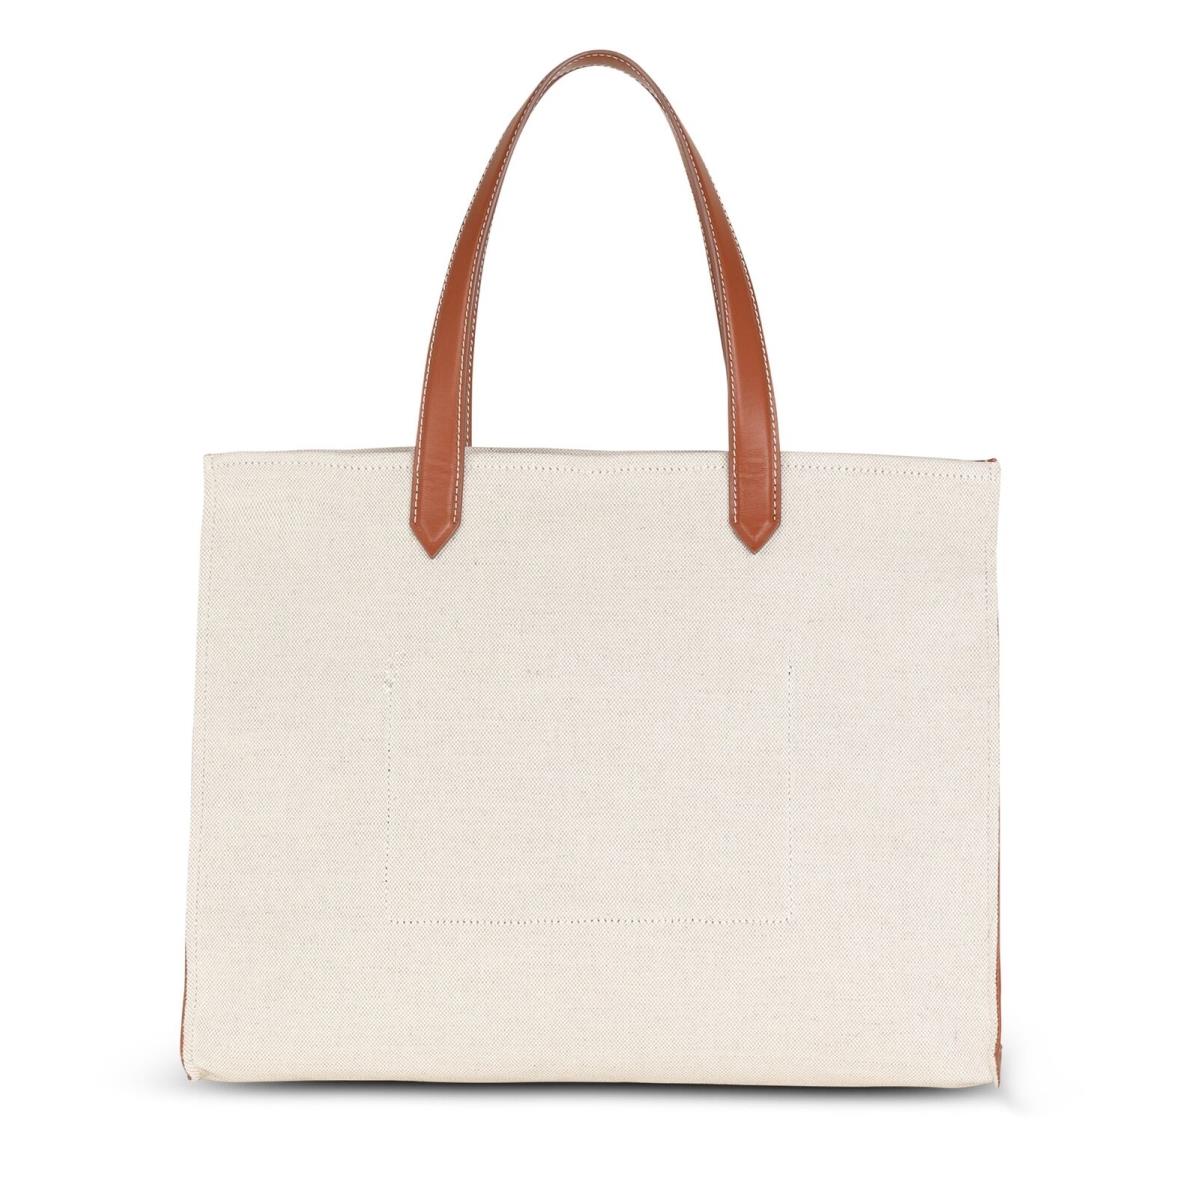 48 Hour - Balmain B-army 42 Tote Beige Canvas with Brown Leather Trim